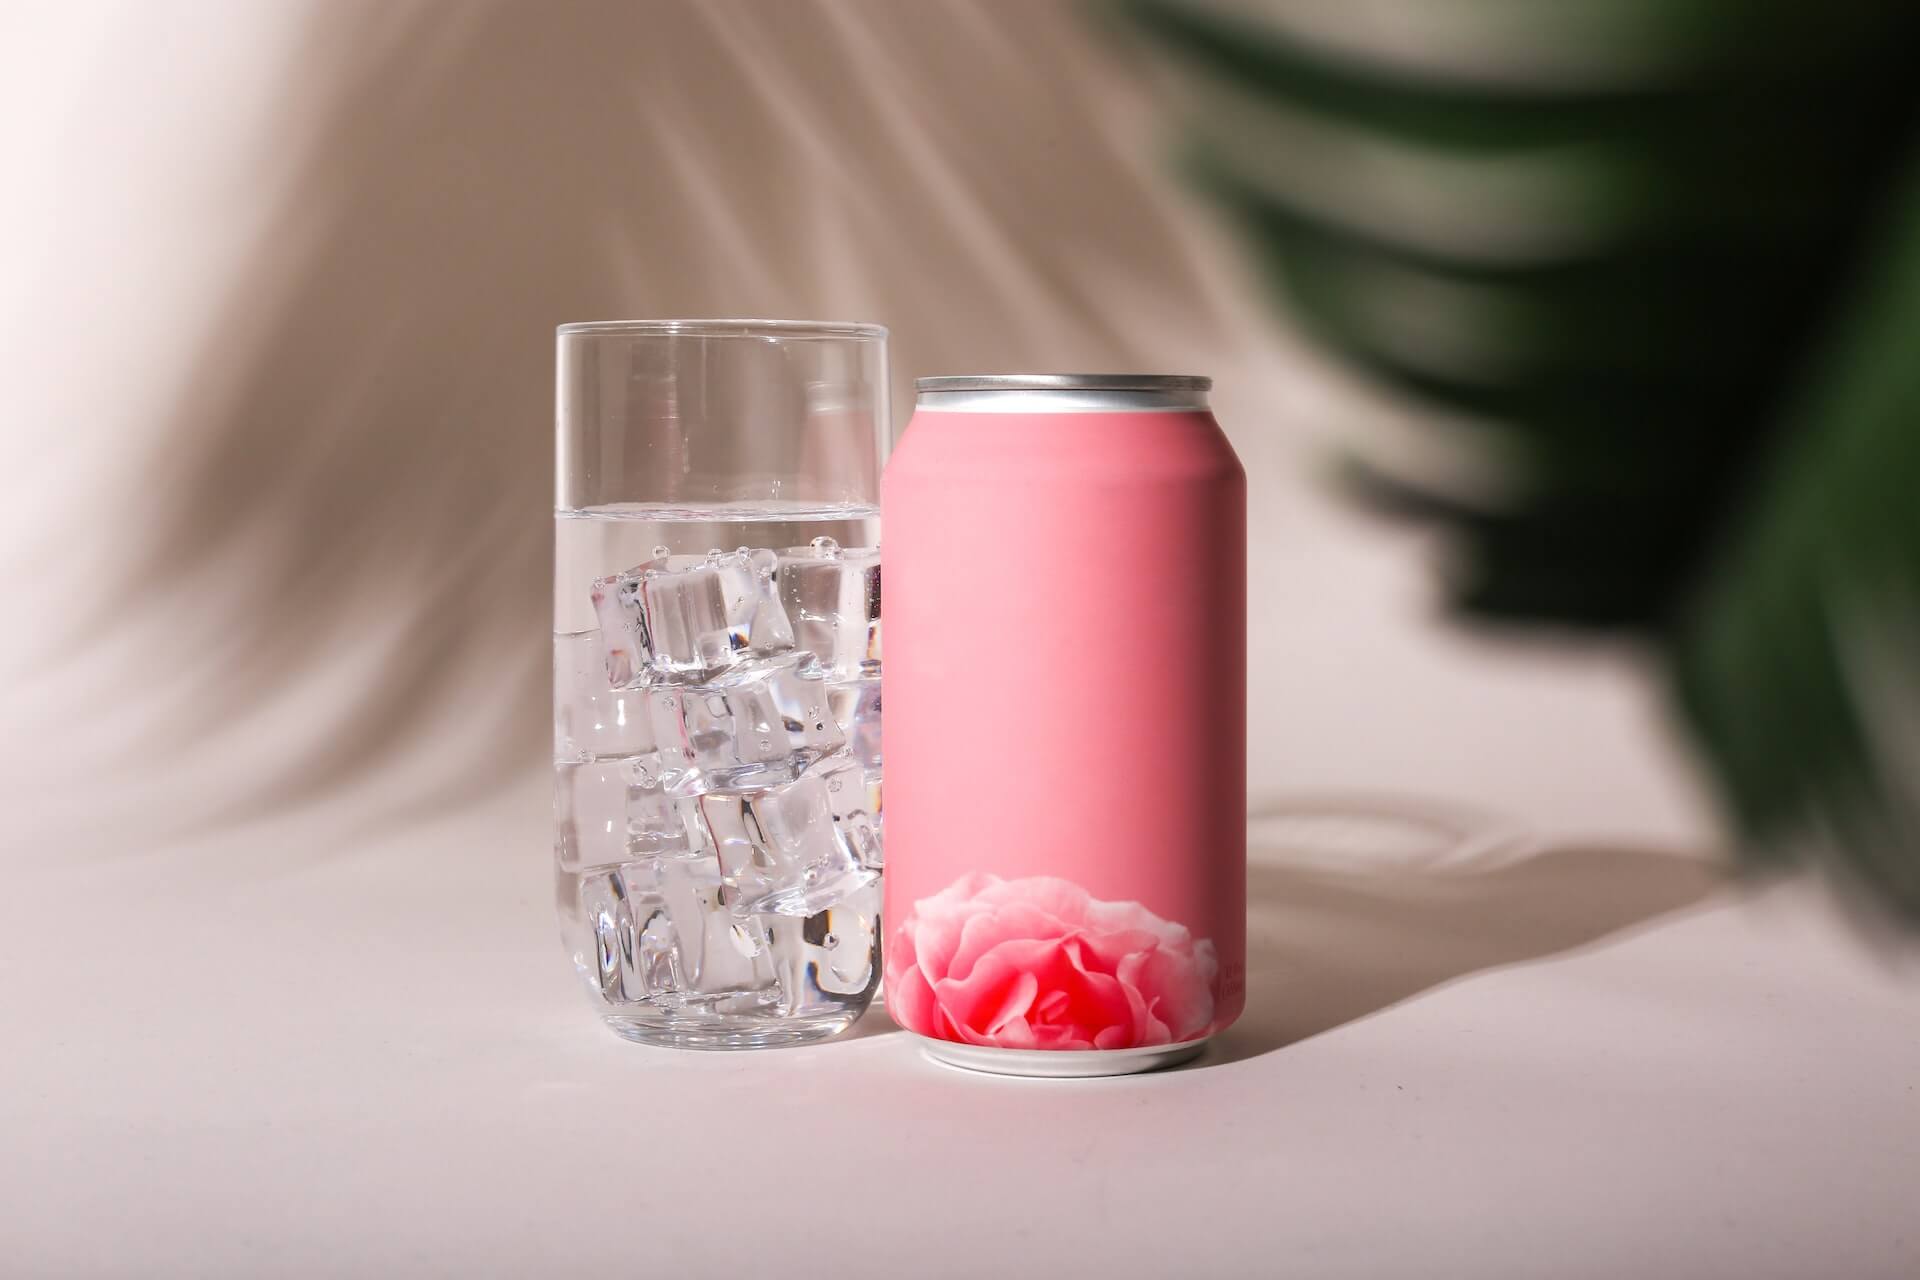 A pink soda can next to a glass of water